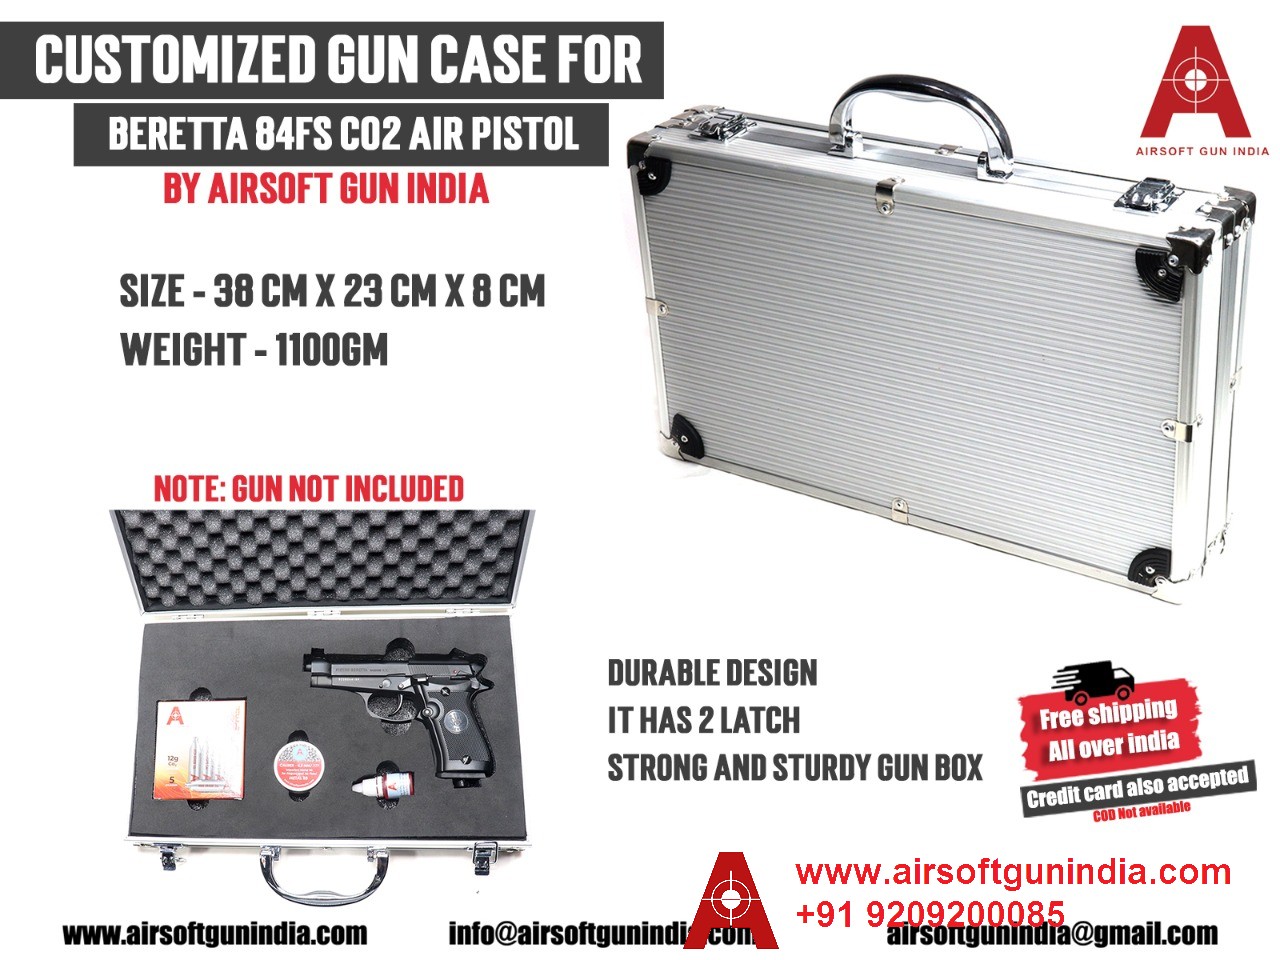 Customized Case For Beretta 84FS Co2 Pistol By Airsoft Gun India